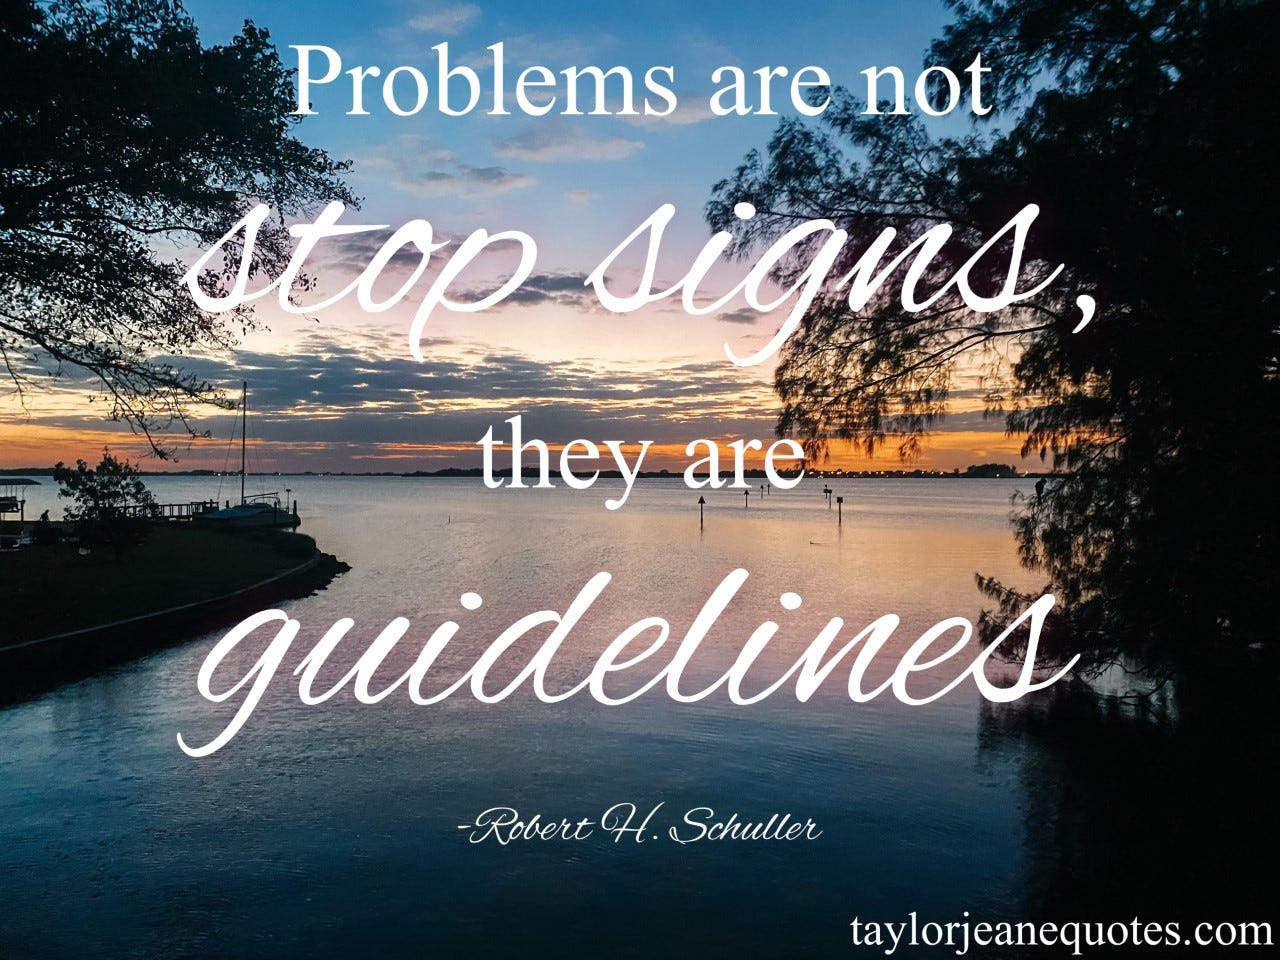 taylor jeane quotes, quote of the day, robert h schuller, robert h schuller quotes, motivational quotes, problems quotes, inspirational quotes, quote of the day email subscription, problem solving quotes